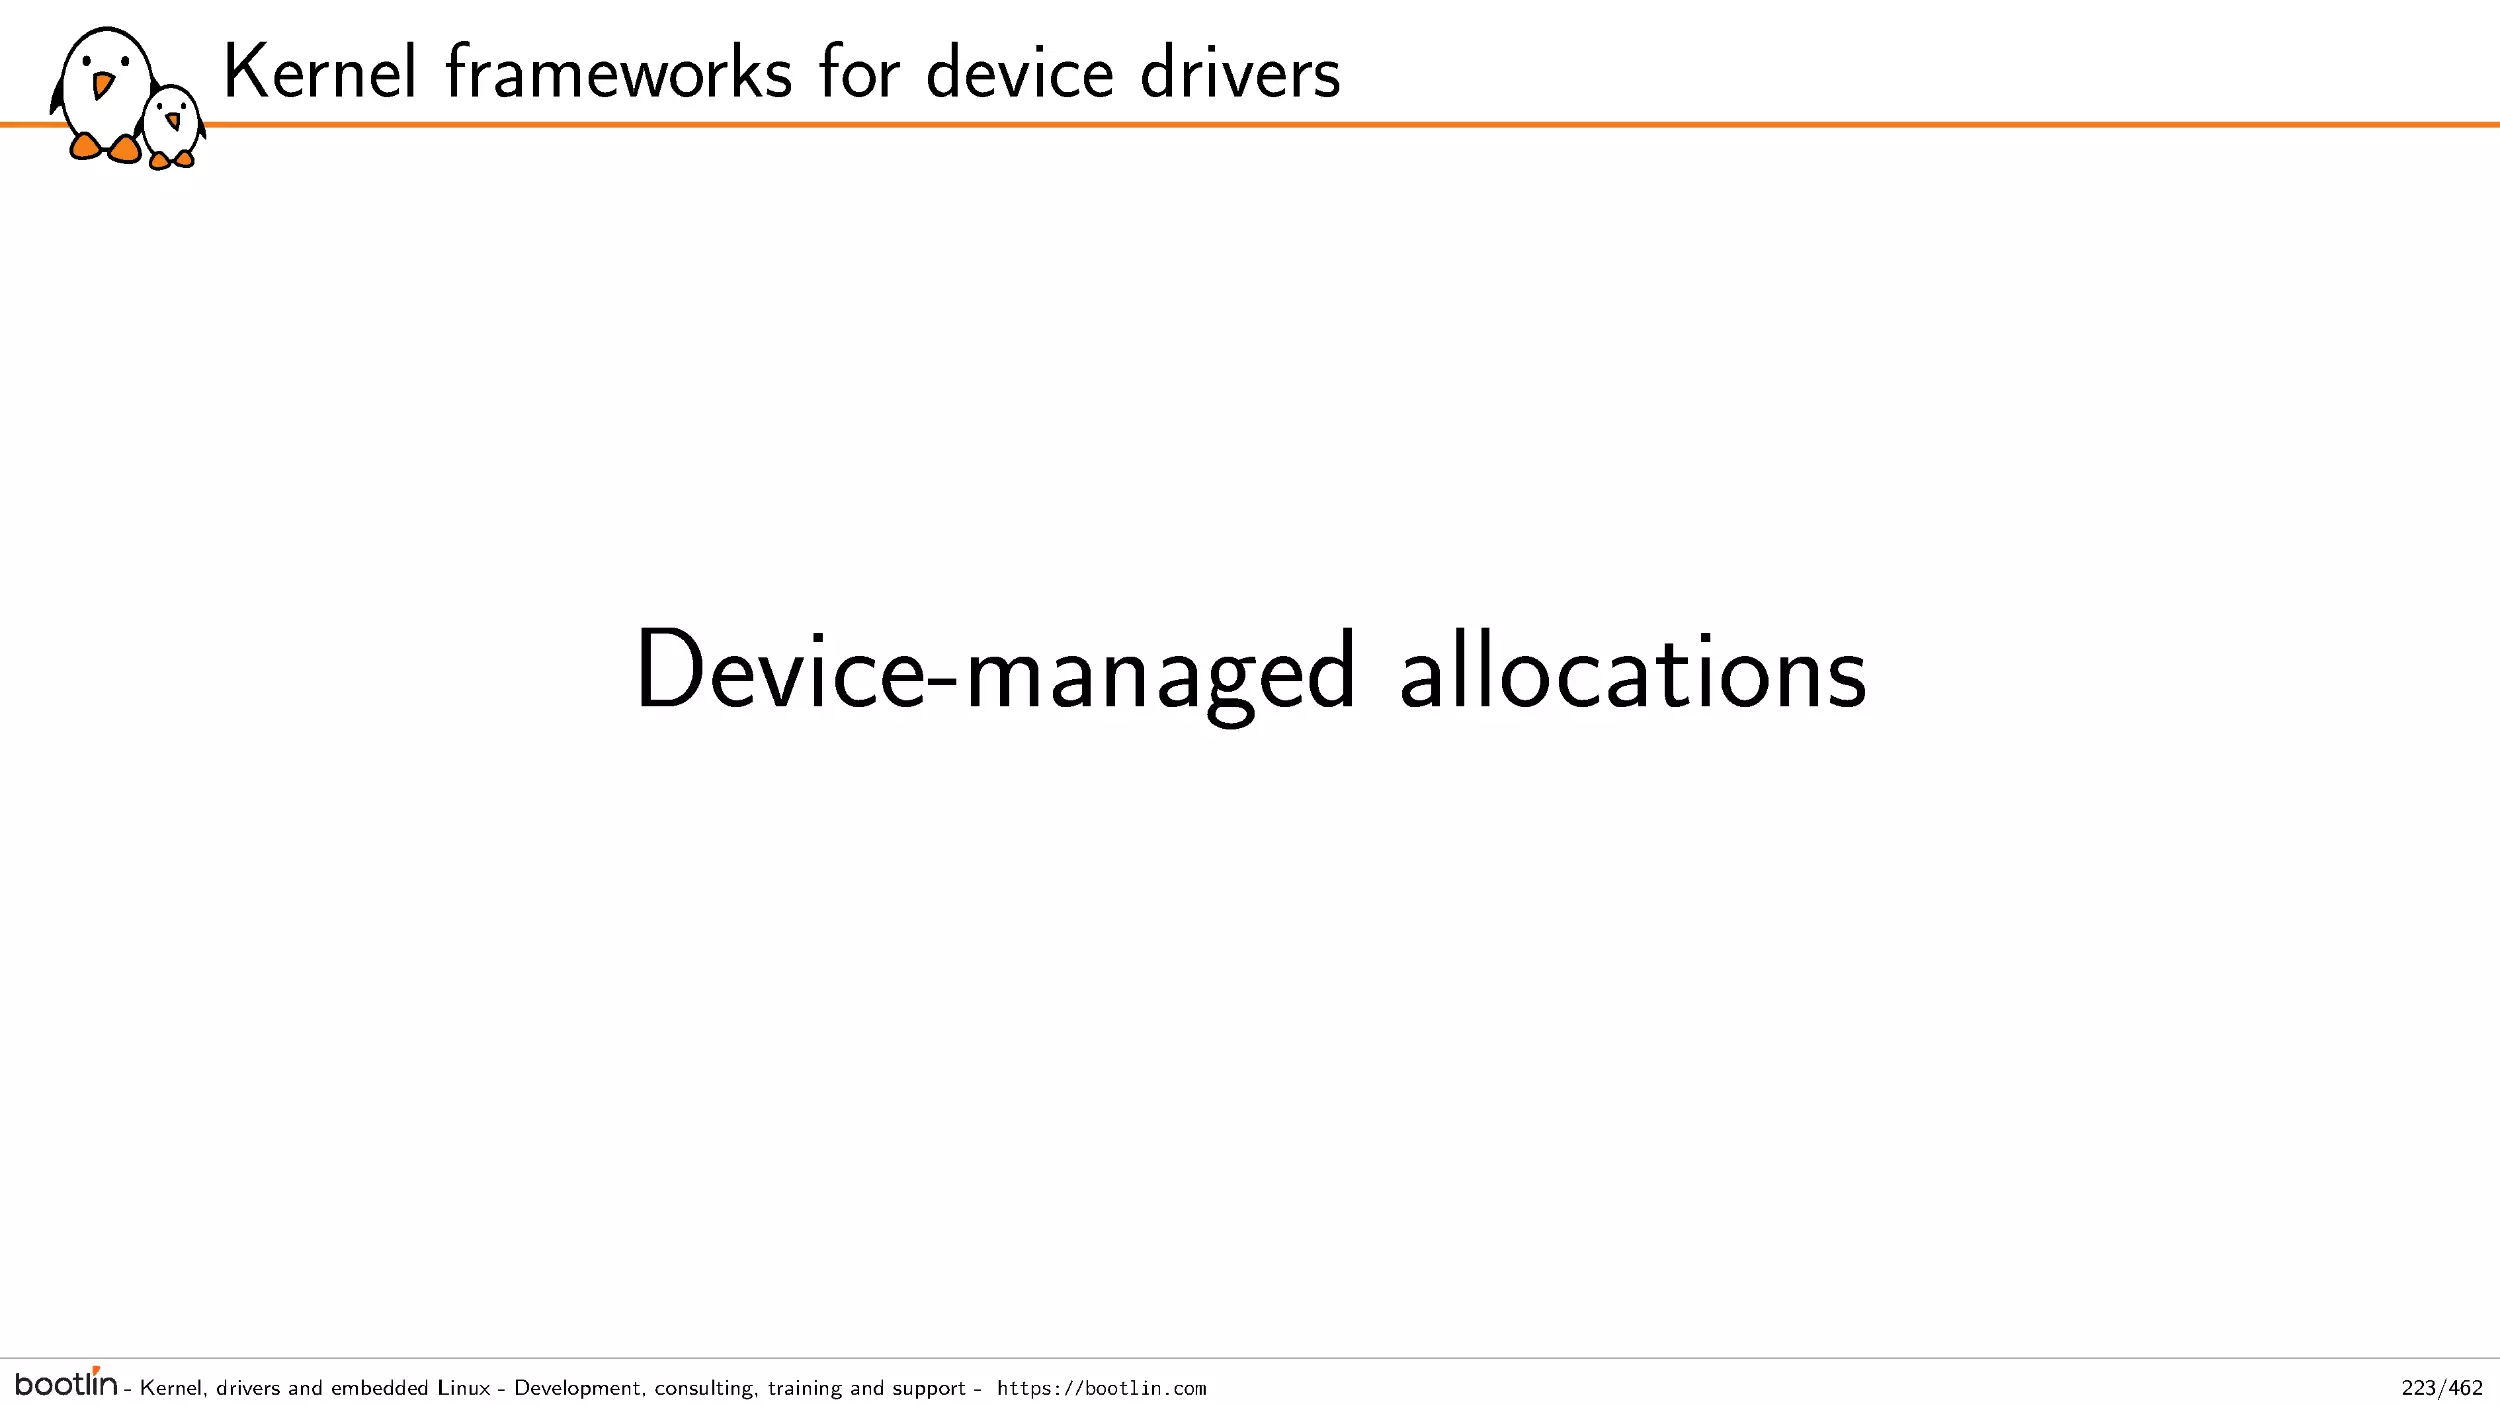 Device-managed allocations